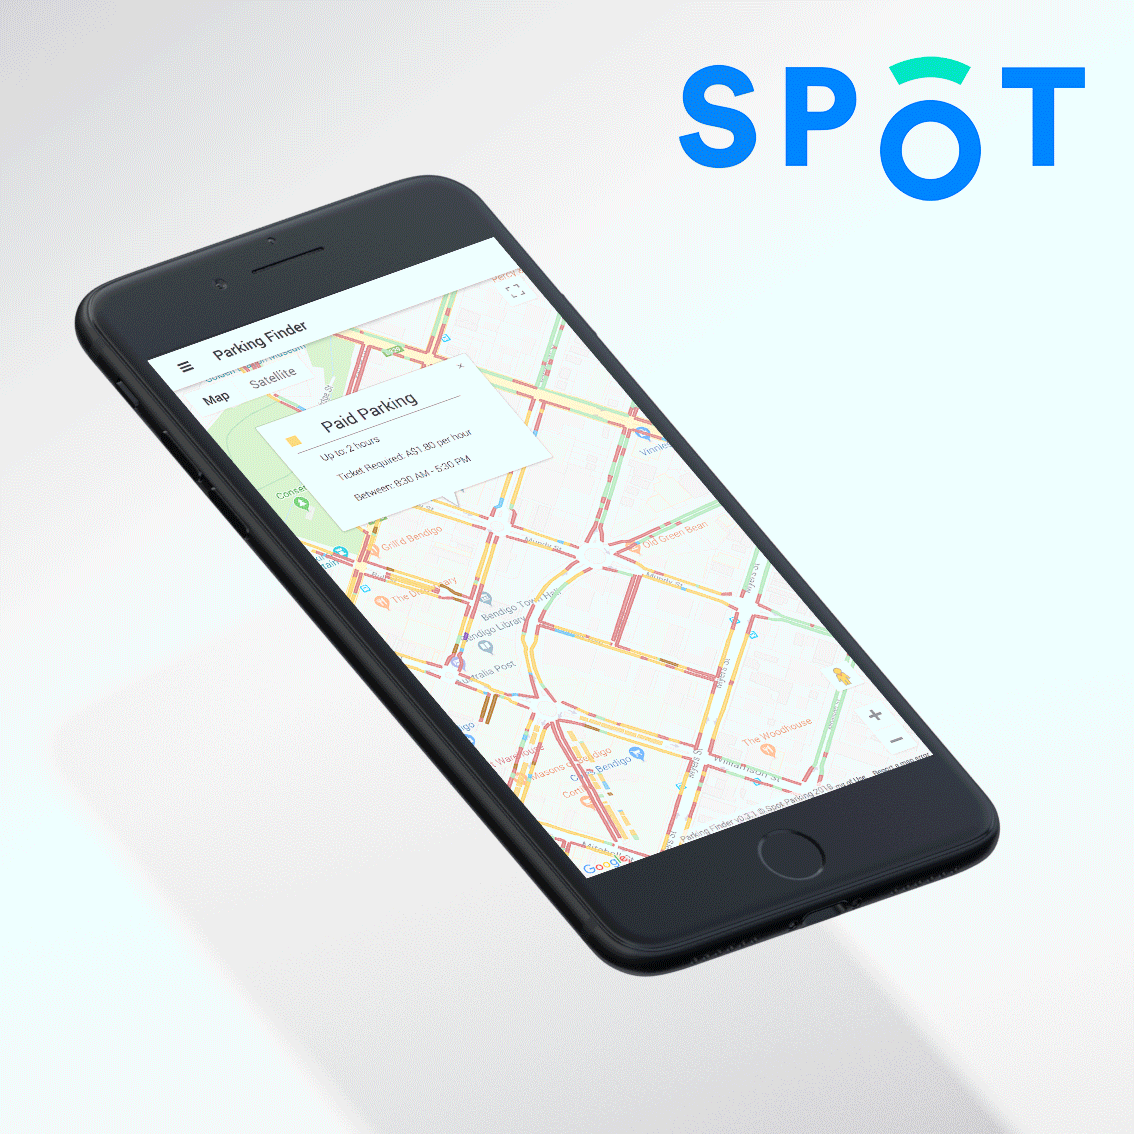 Illustration of the Spot Parking app displayed on a smartphone.